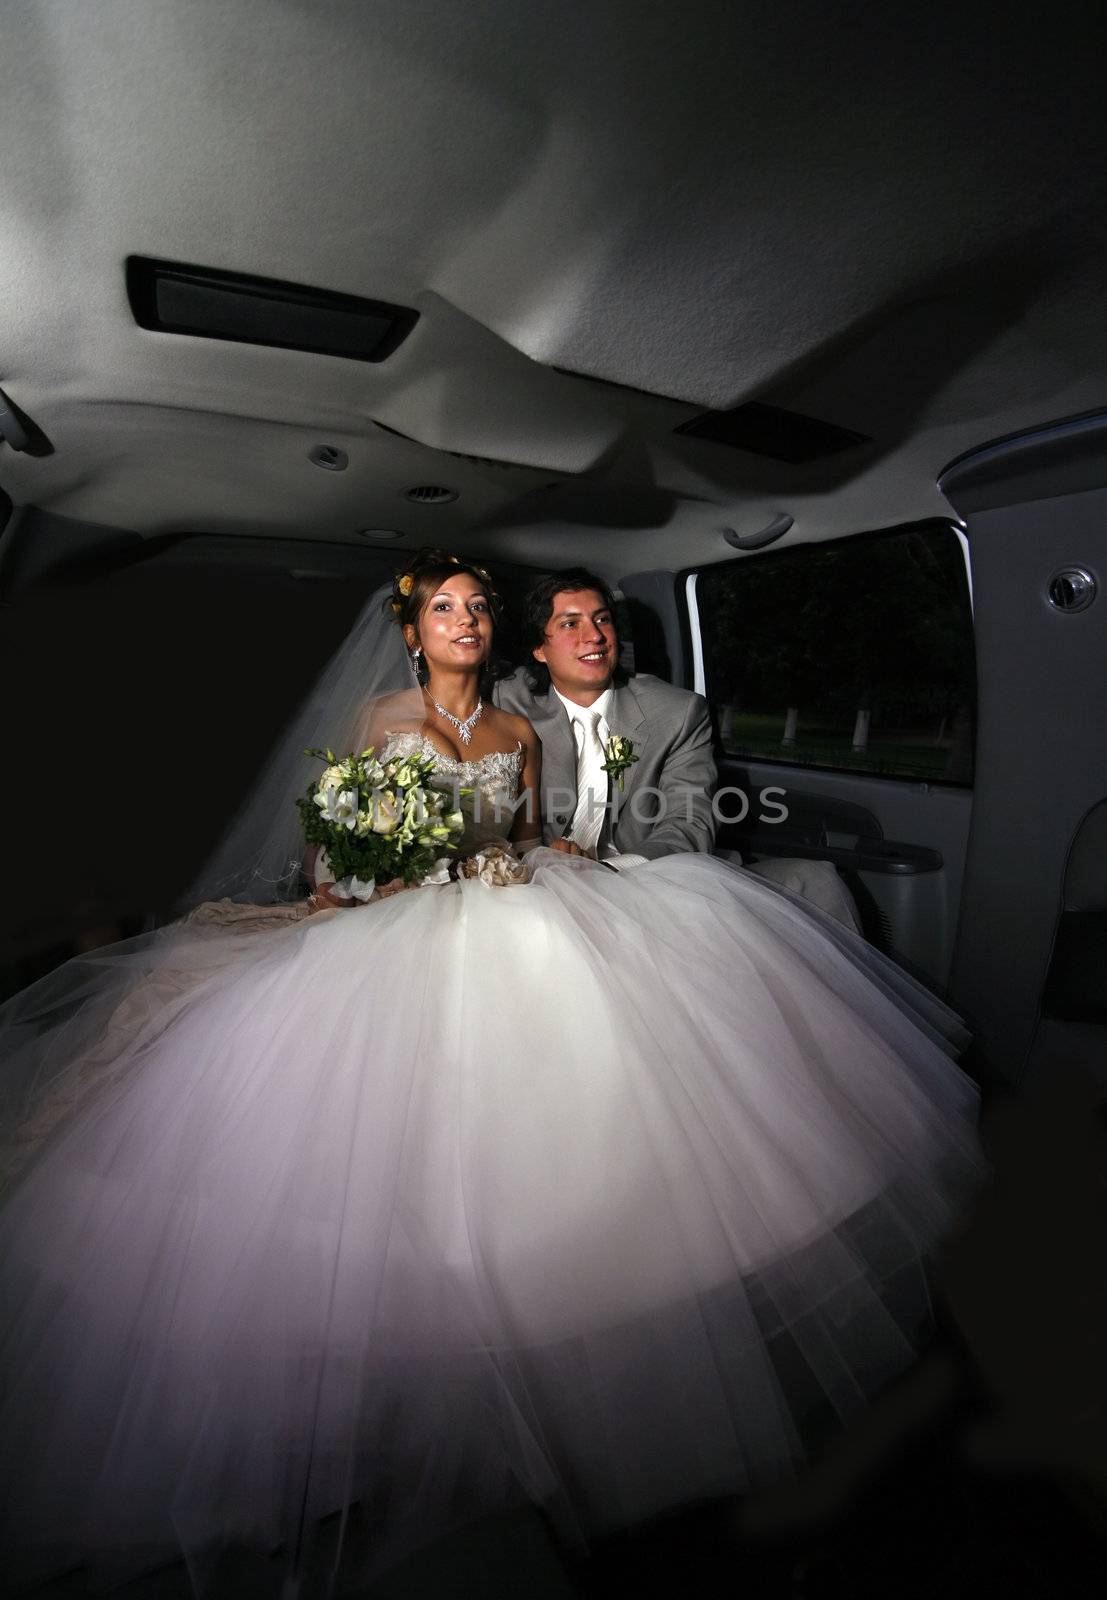 Newly-married couple in car